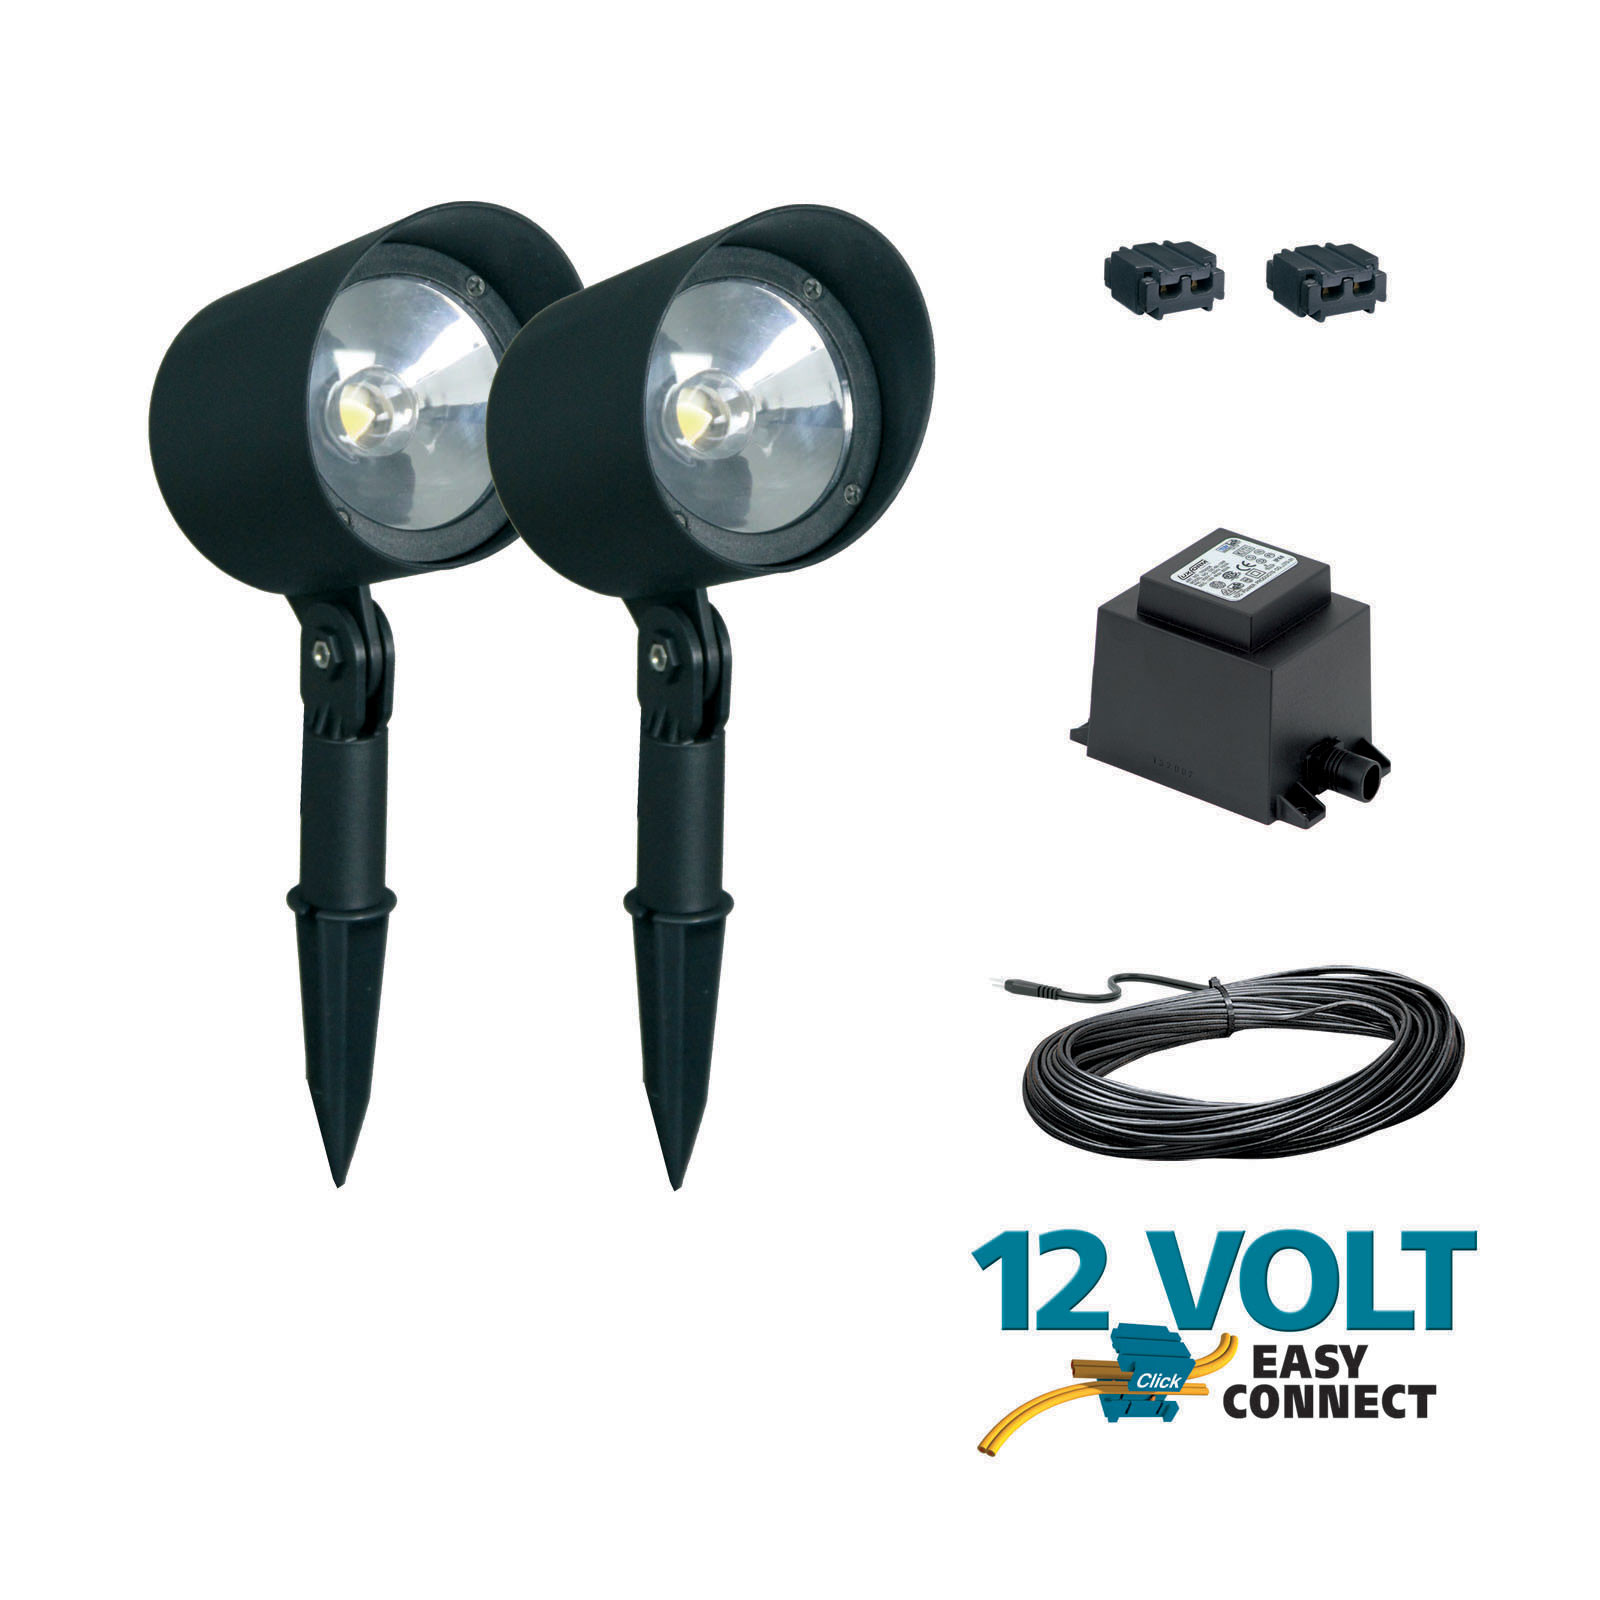 Electrical Landscape Lighting
 10 benefits of Electric outdoor lights